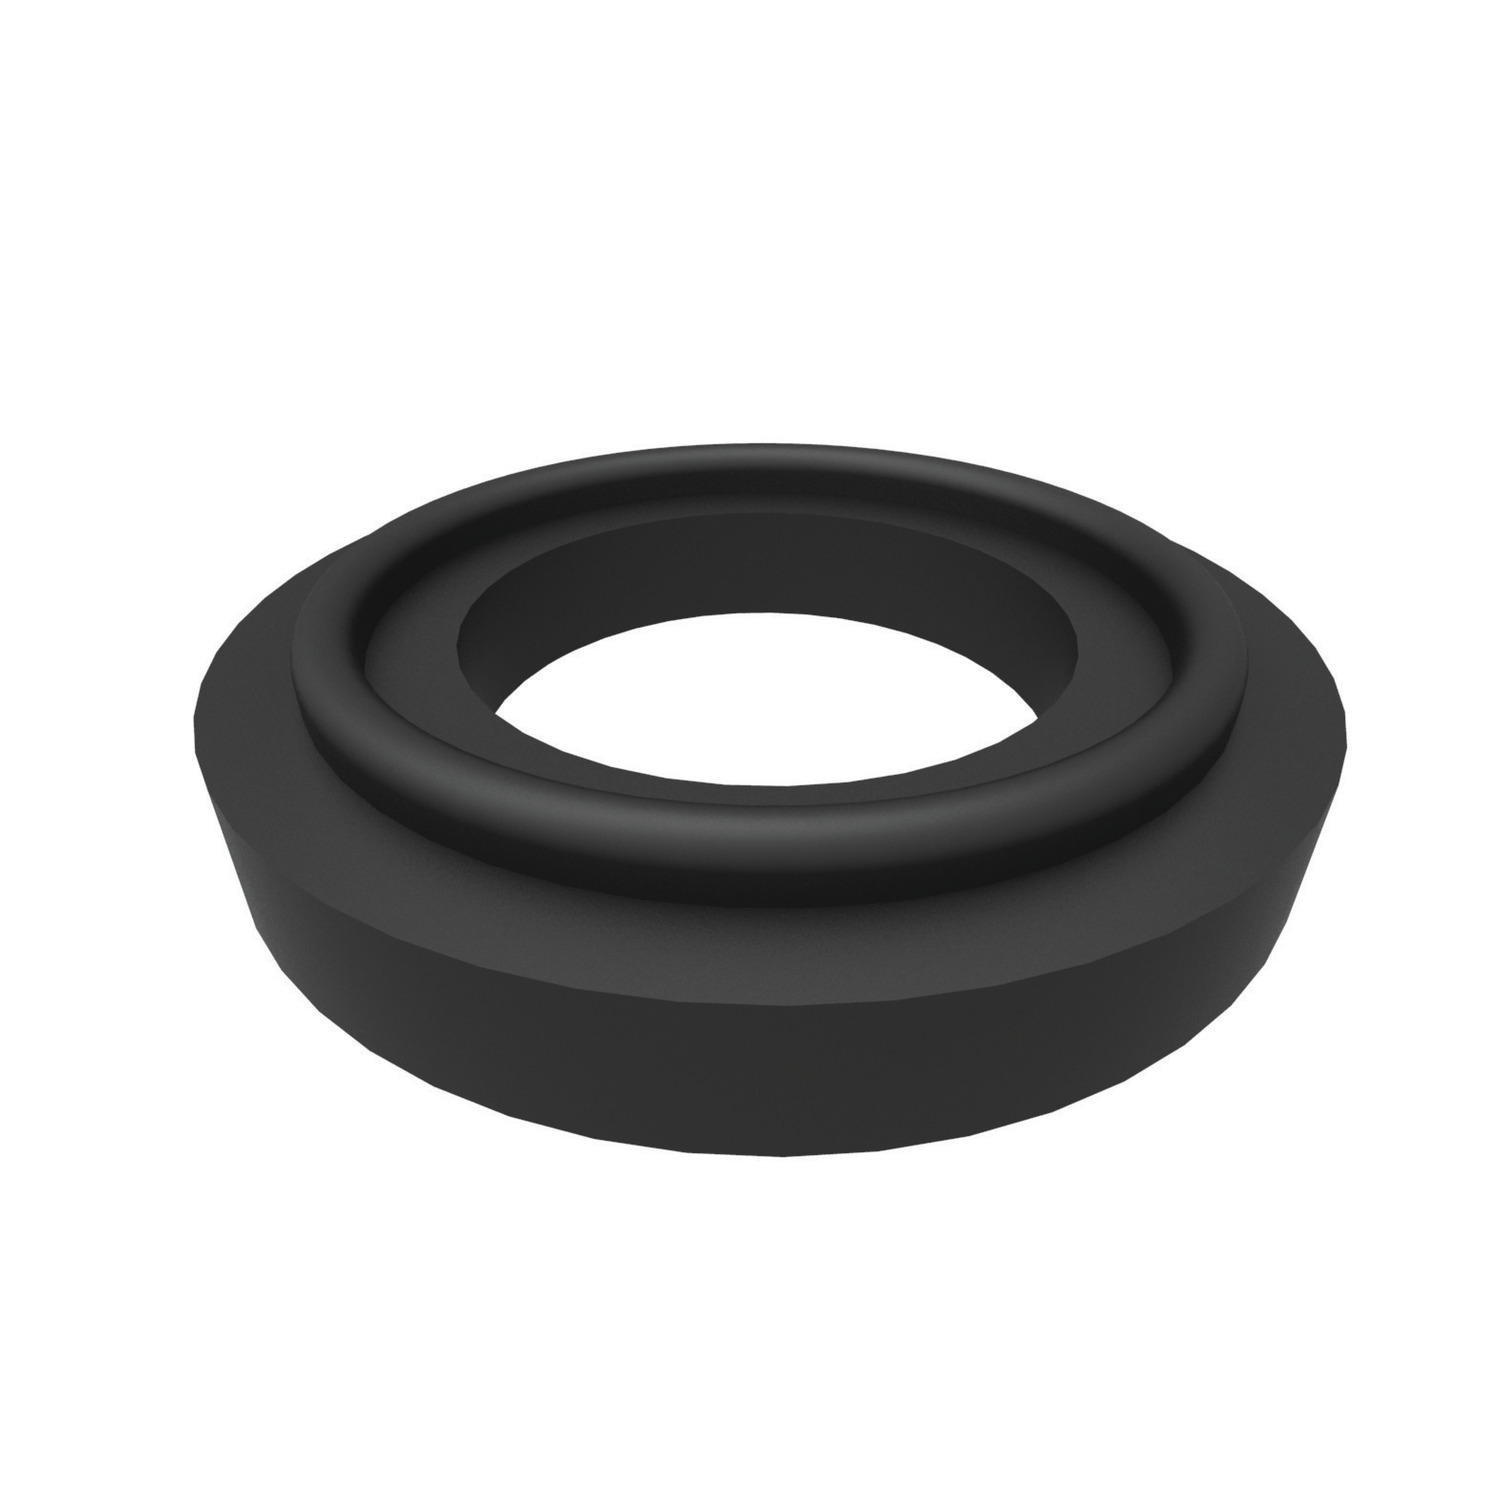 Anti-vibration Rings Standard anti-vibration rings. Rubber hardness - 70 Shore A. For more technical information, please visit our product page.